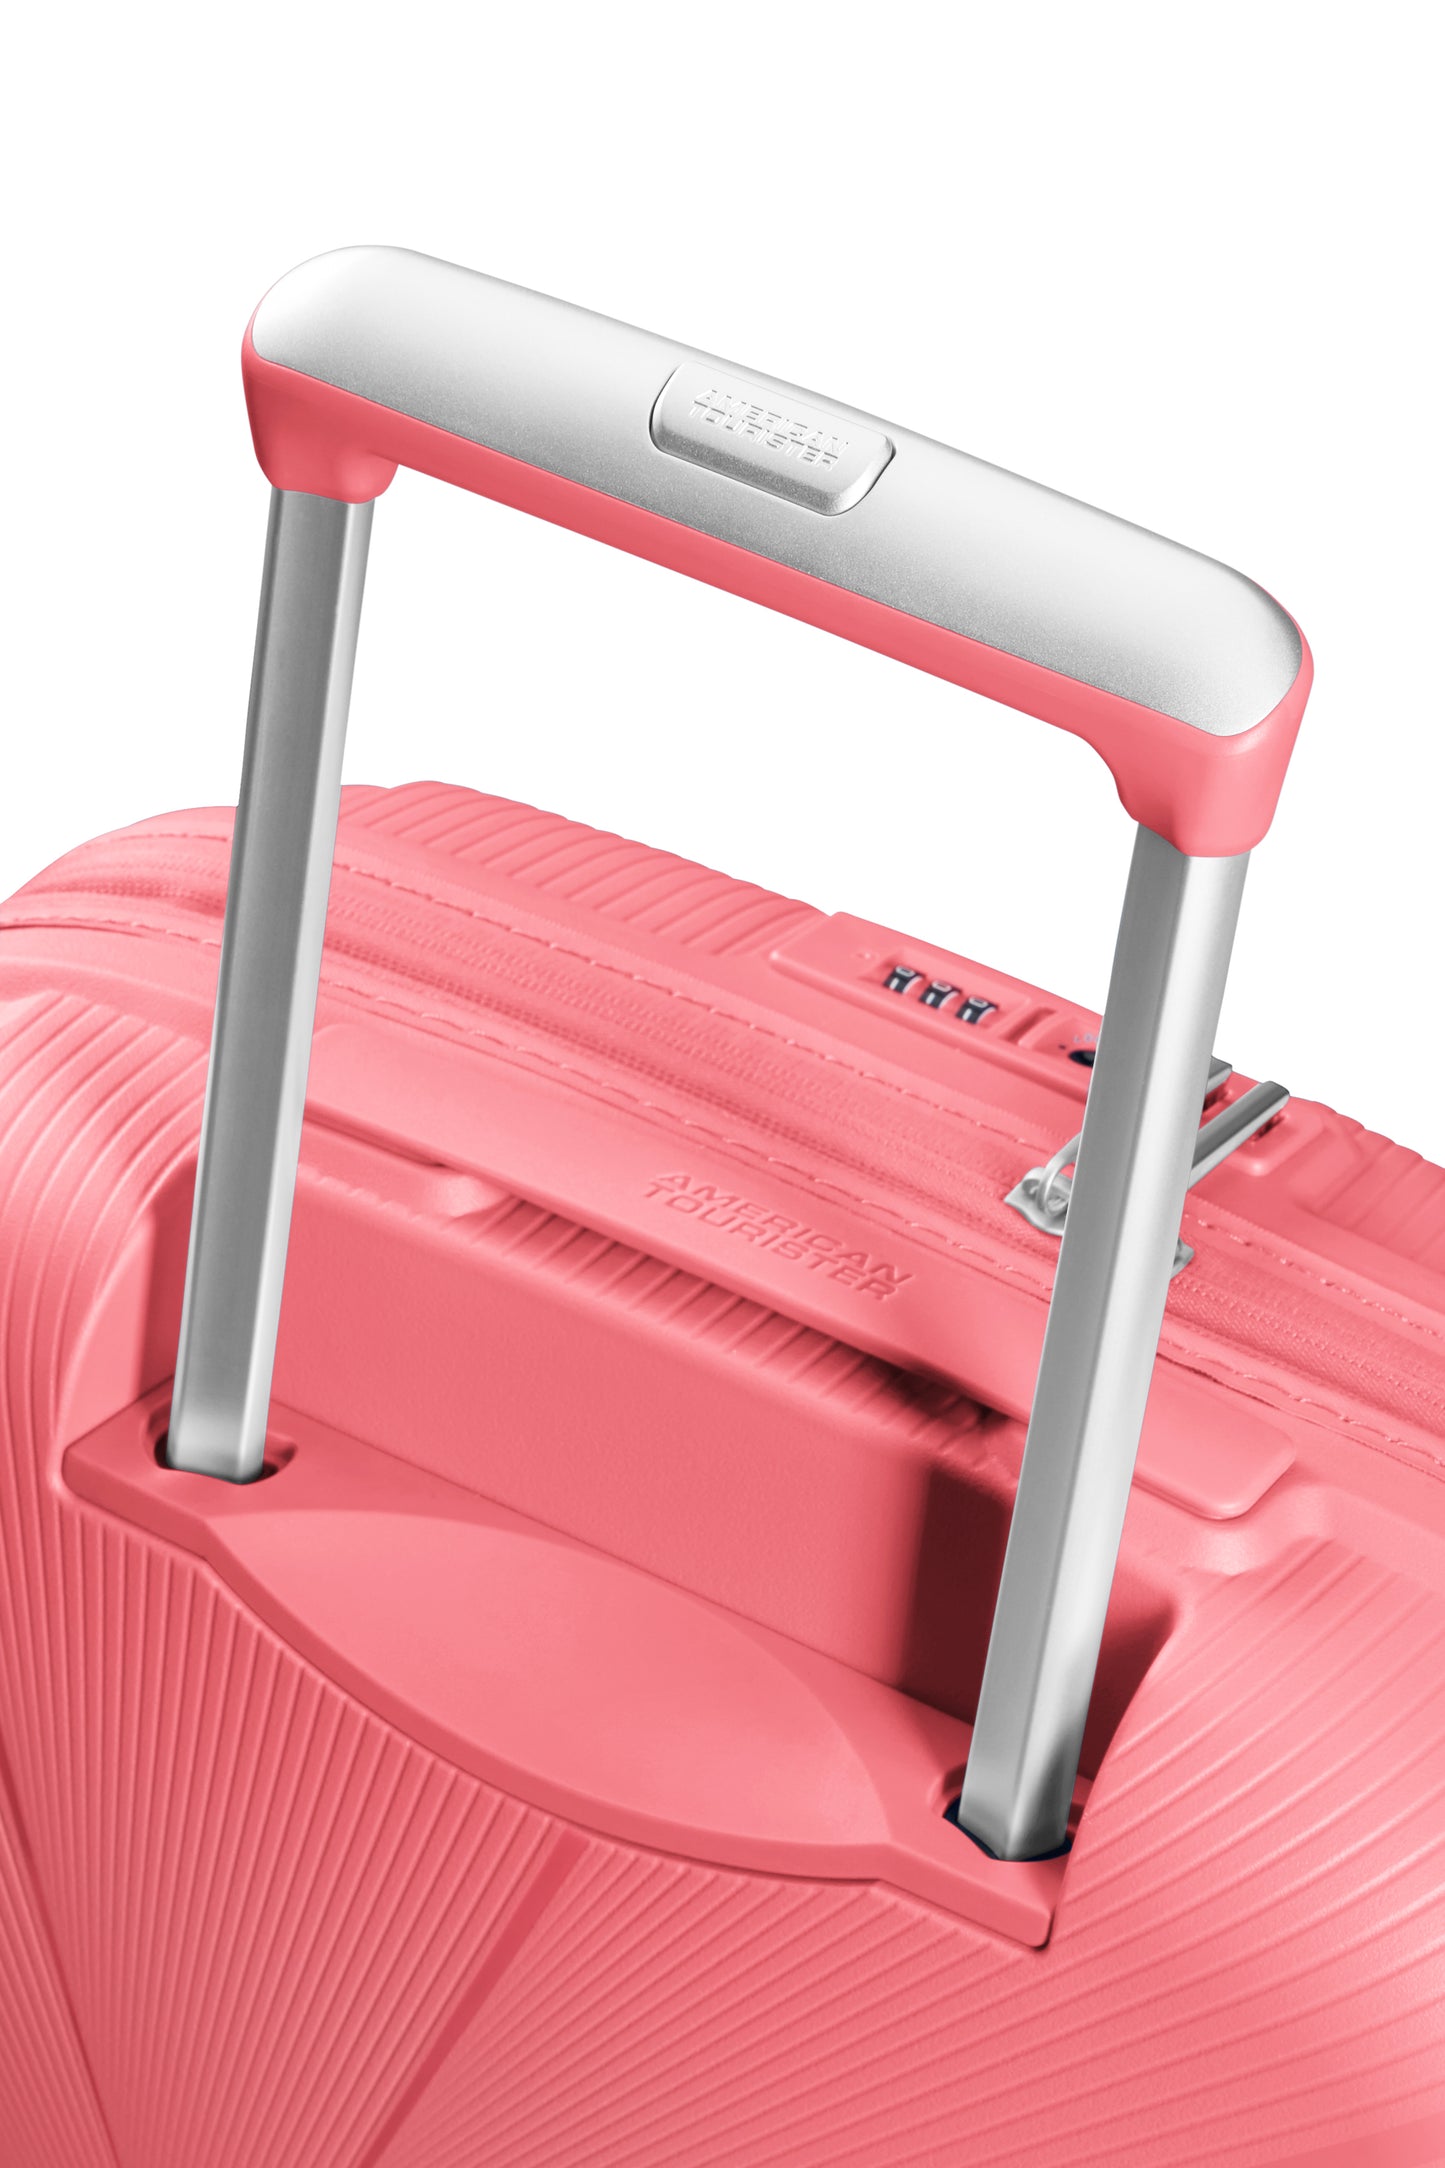 American Tourister STARVIBE  sp55 exp    Sun kissed Coral